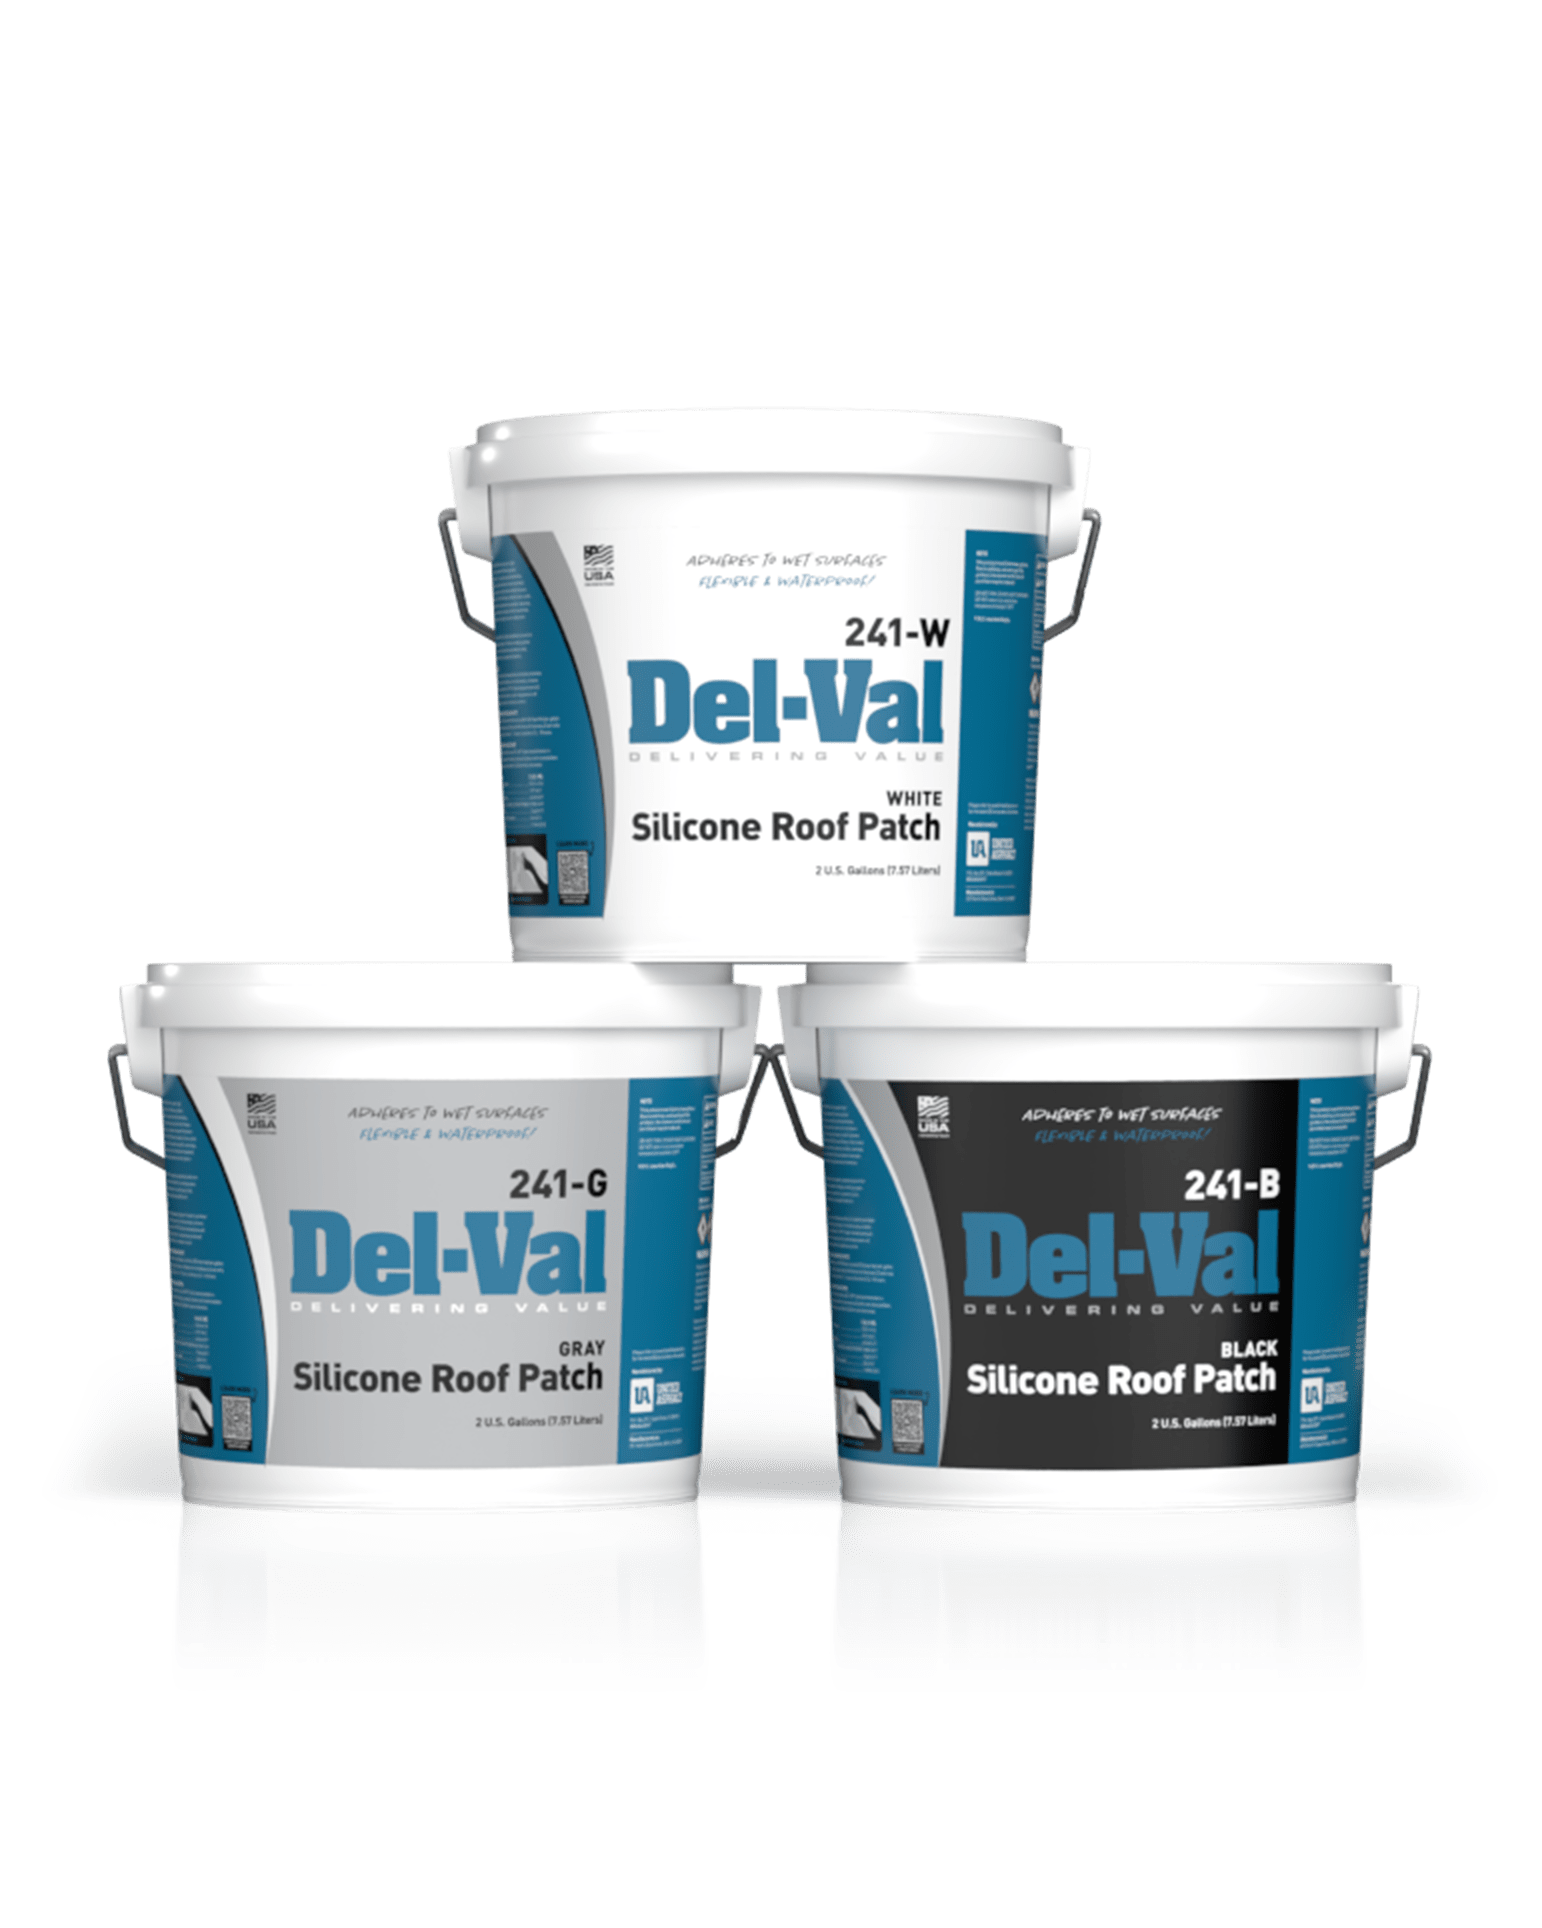 Del-Val 241 Silicone Roof Patch Stacked Pyramid of 2 Gallon Plastic Buckets